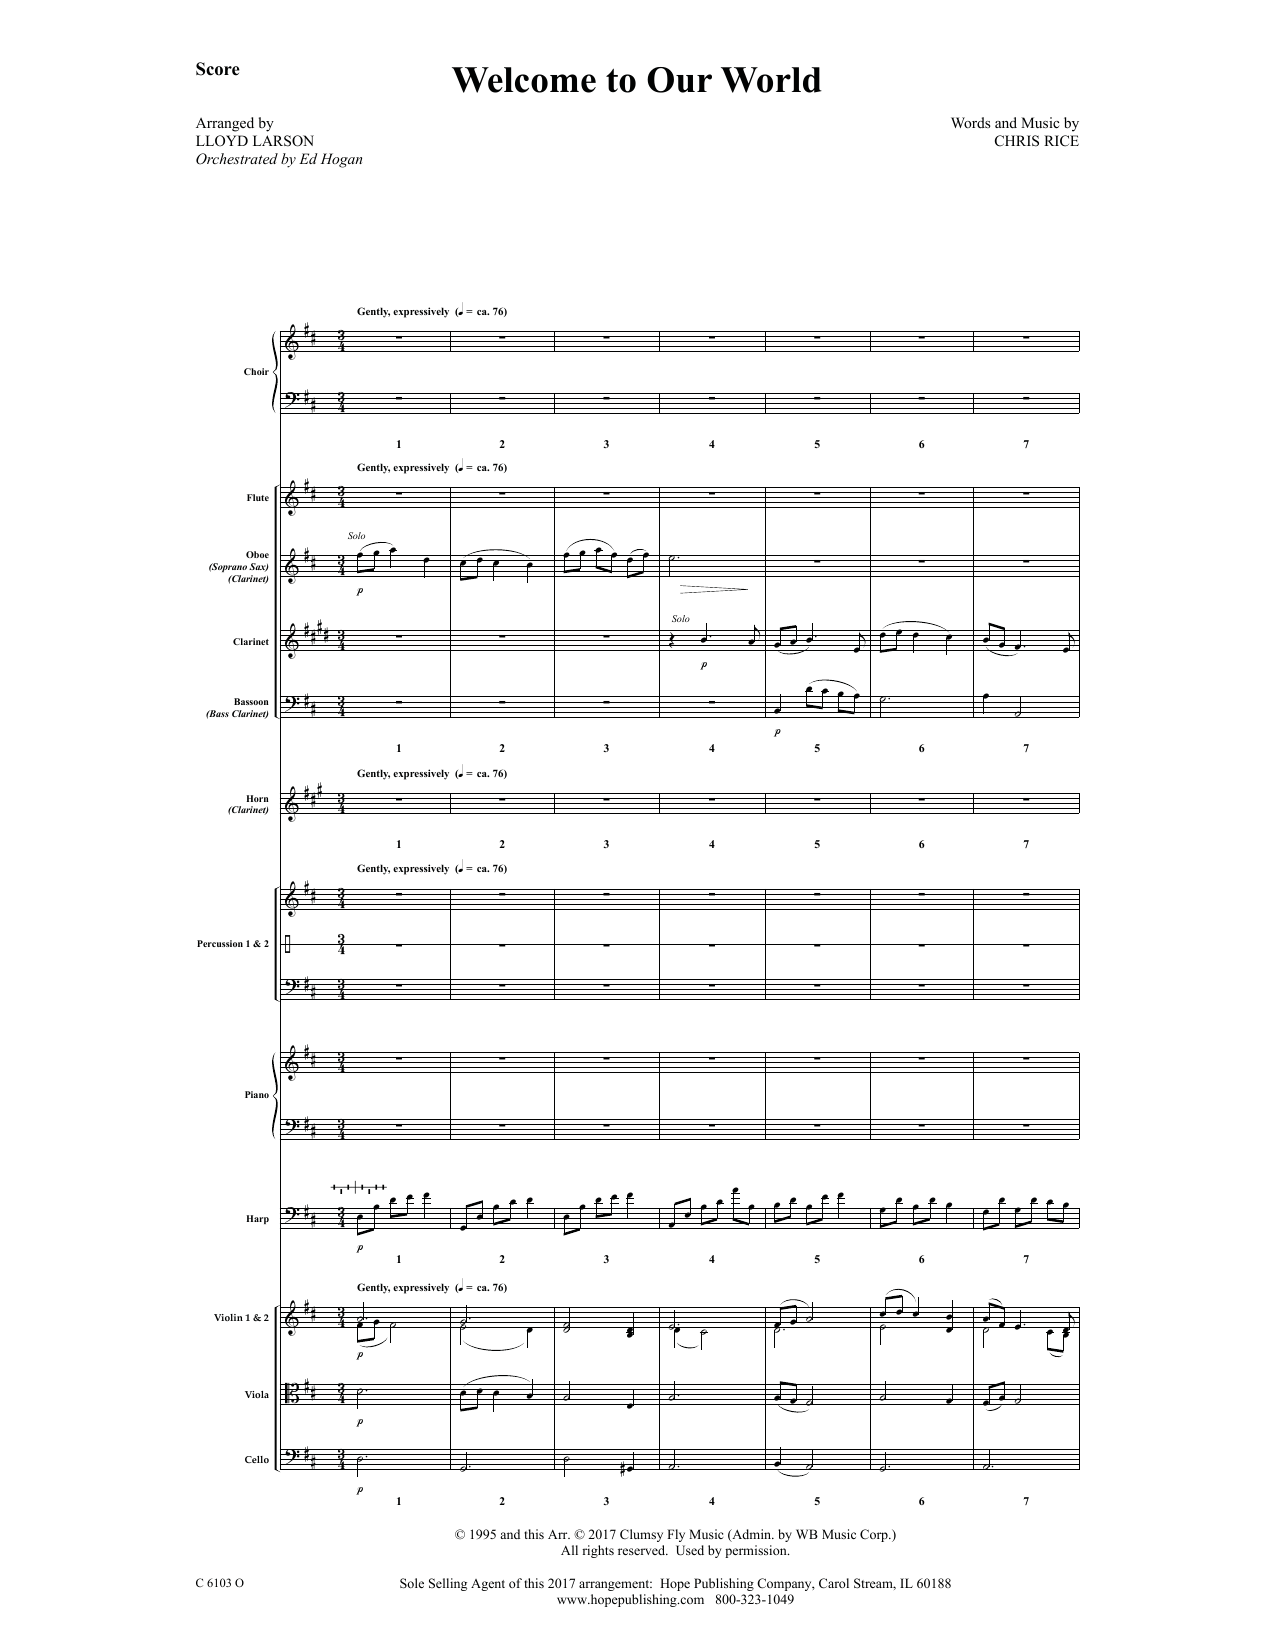 Download Ed Hogan Welcome to Our World - Full Score Sheet Music